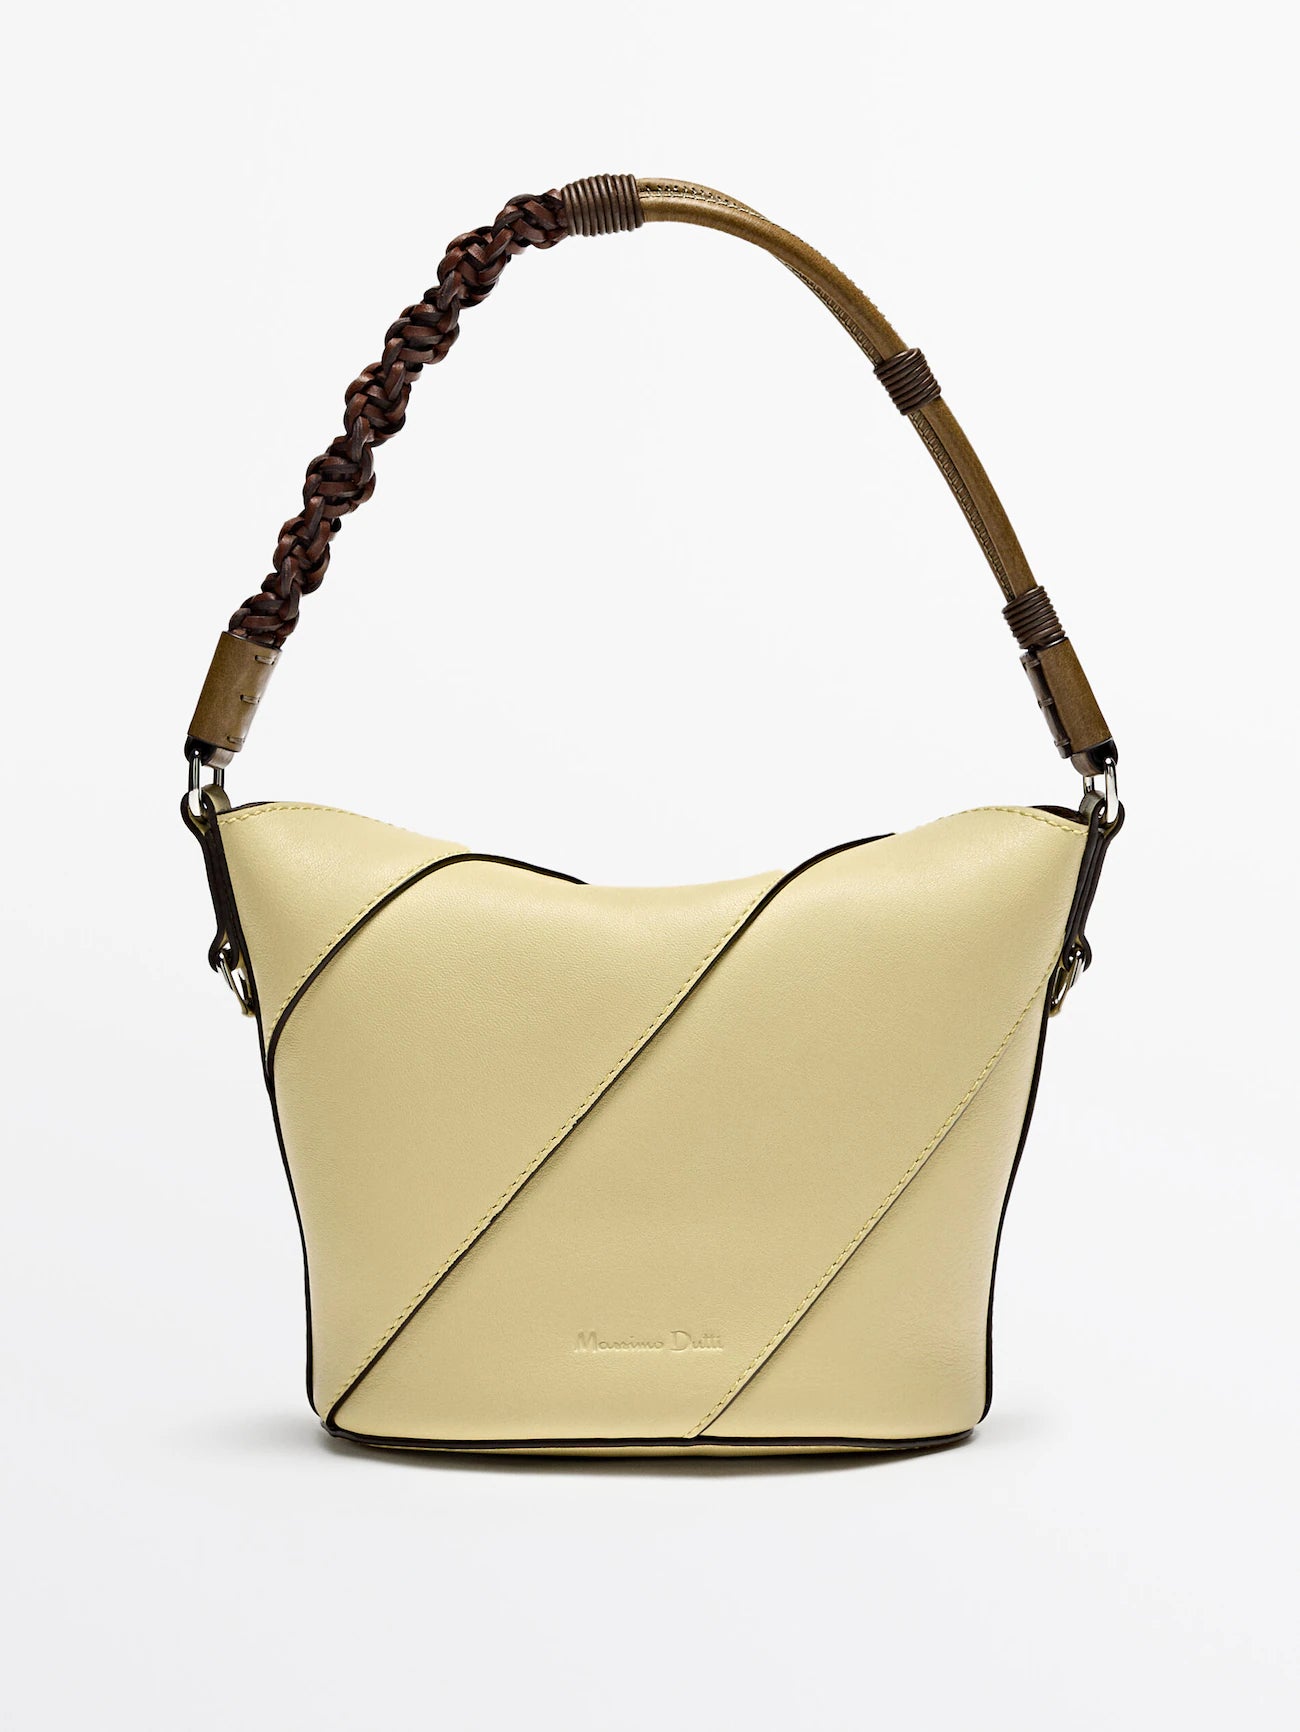 Nappa leather crossbody bag with woven strap